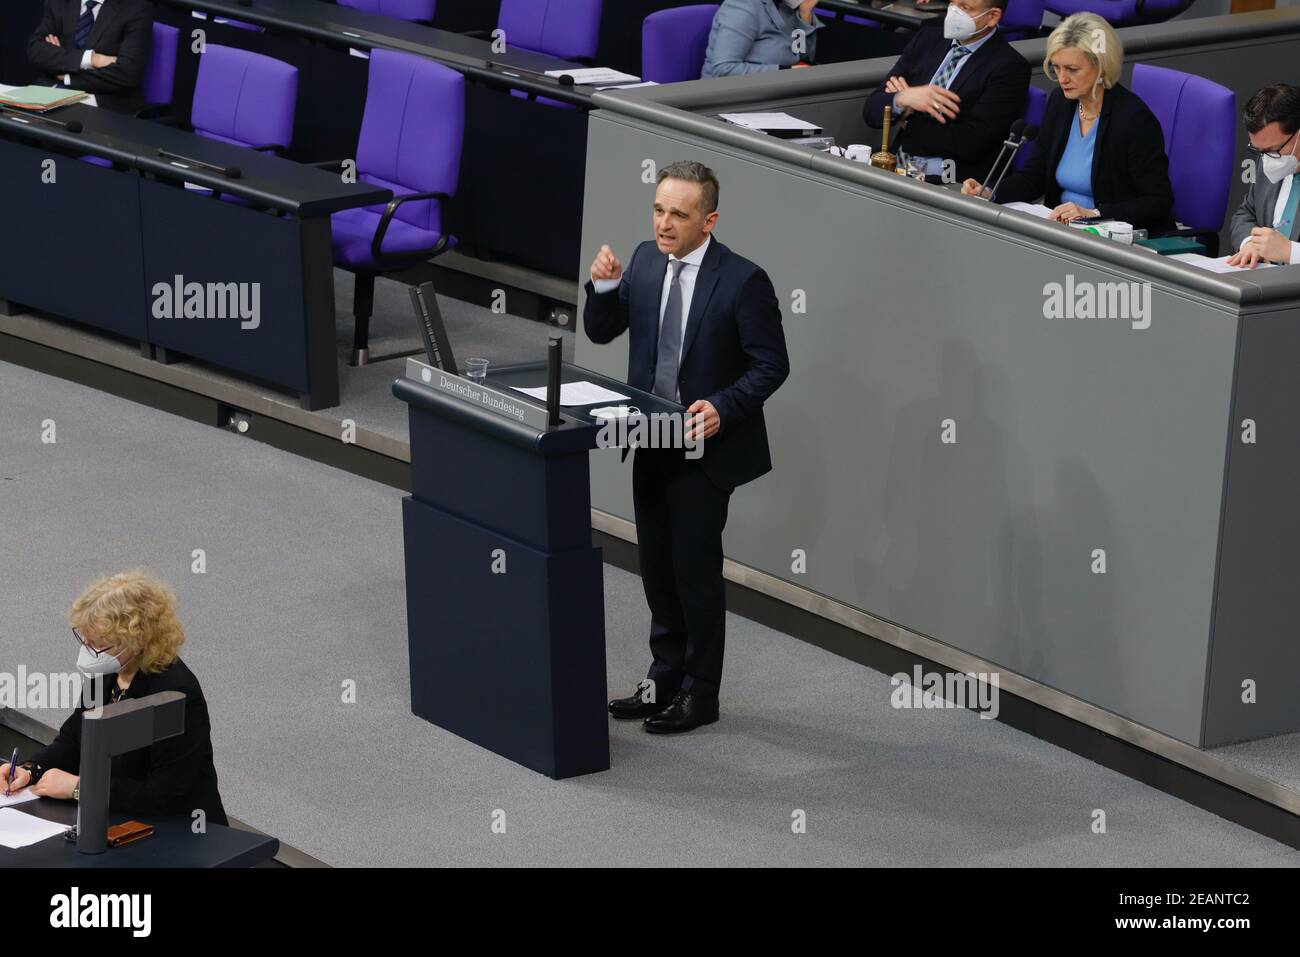 Berlin, Germany. 10th Feb, 2021. Heiko Maas is Federal Minister for Foreign Affairs. In the previous cabinet he was Federal Minister of Justice. The fully qualified lawyer, born in Saarlouis in 1966, was Deputy Prime Minister in Saarland from 2012 to 2013. Credit: Juergen Nowak/Alamy Live News Stock Photo